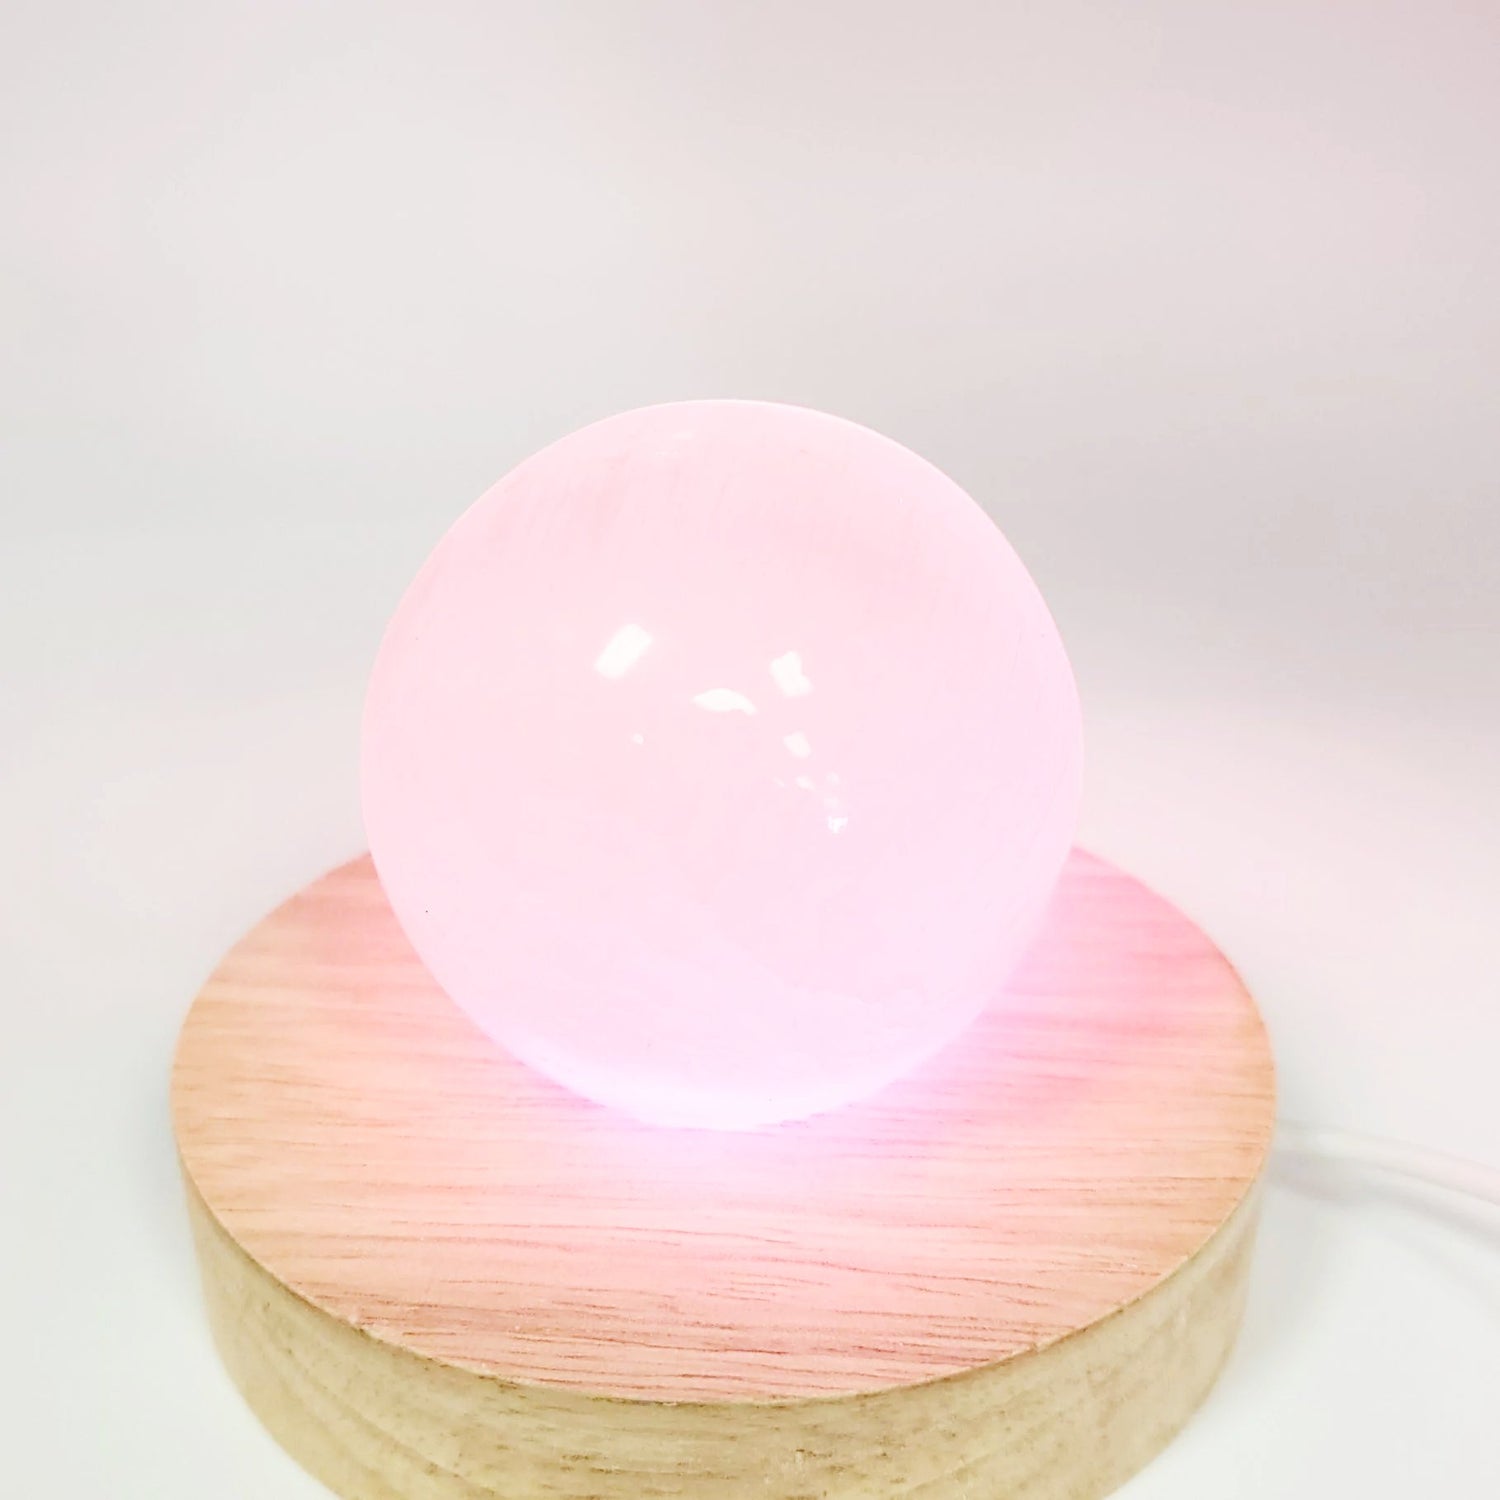 LED Light Wooden Round Base w/ Remote Control - Elevated Metaphysical